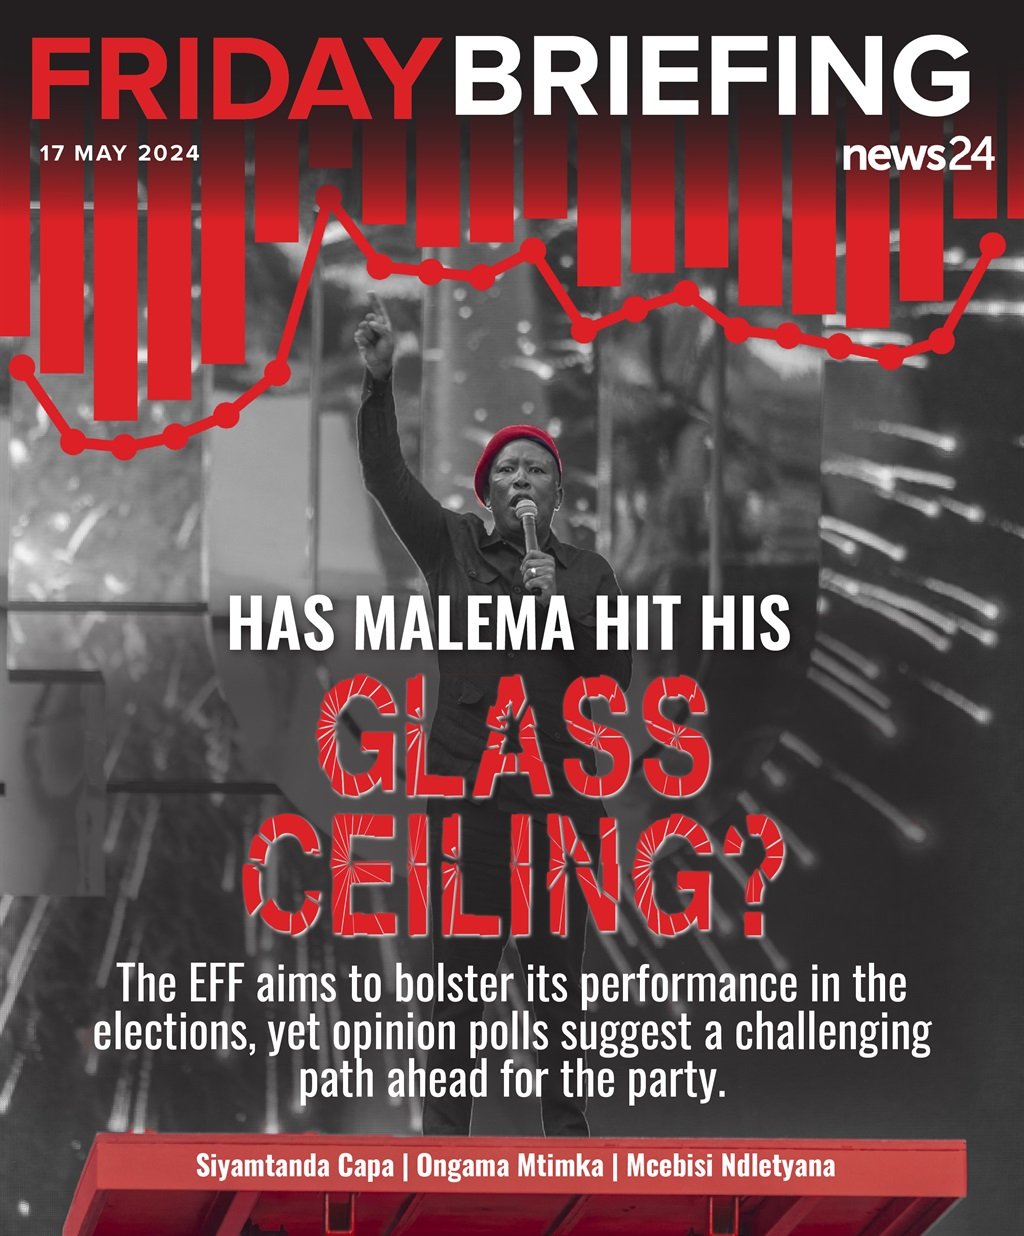 News24 | FRIDAY BRIEFING | Breaking through or bouncing back? Malema confronts SA's political glass ceiling